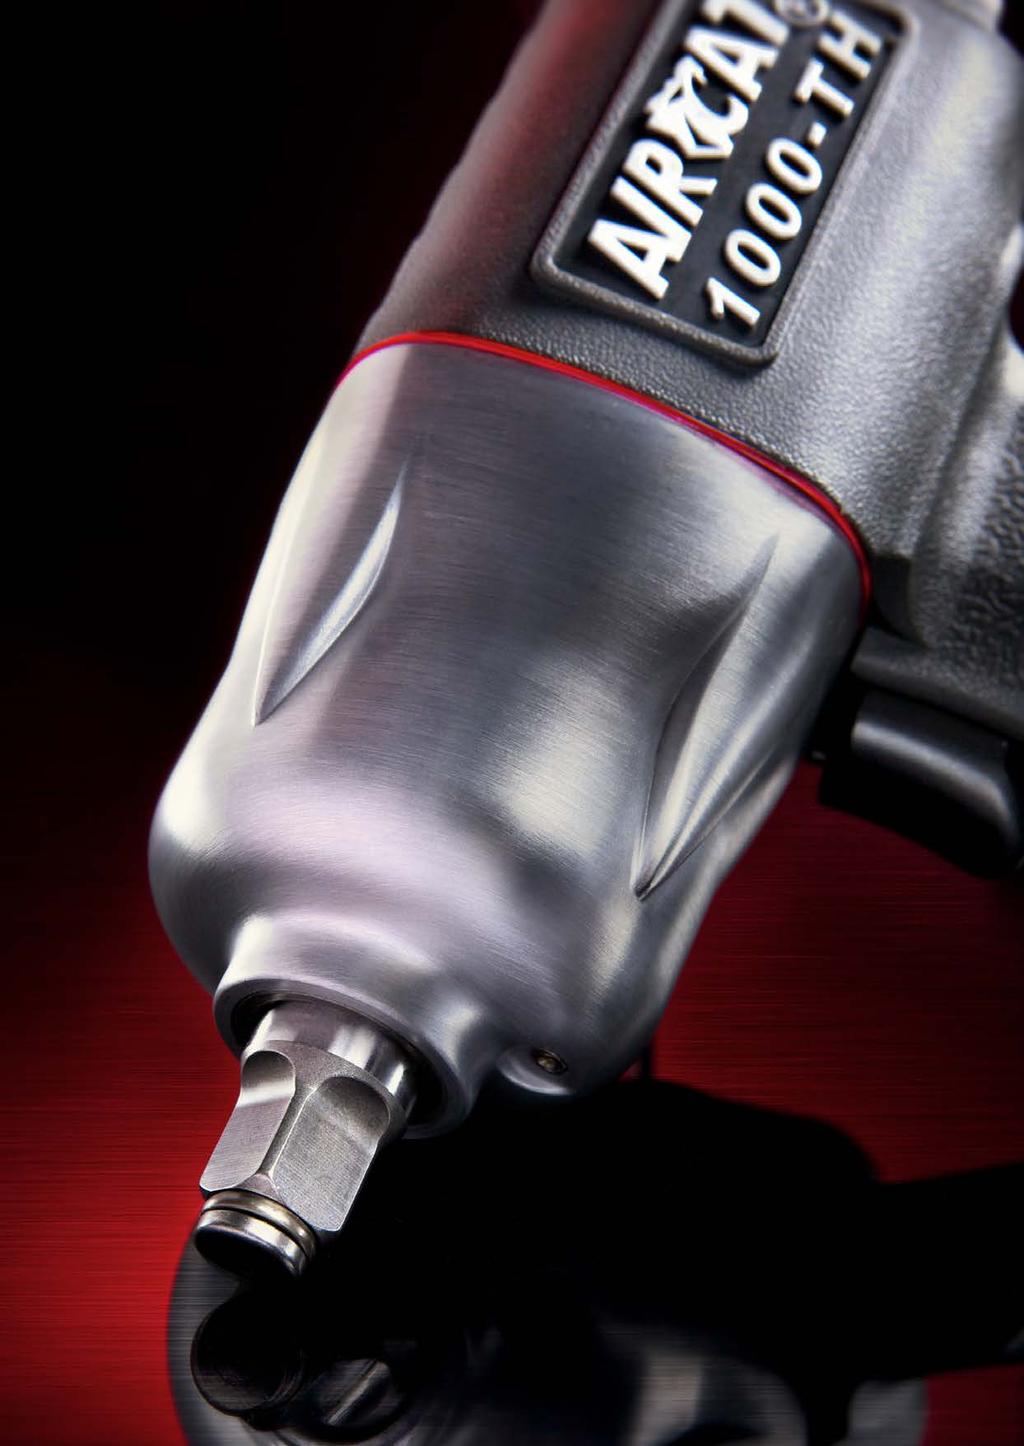 IMPACT WRENCHES MORE POWER - LESS NOISE AIRCAT offers the customer the most loosening torque in our impact wrench,